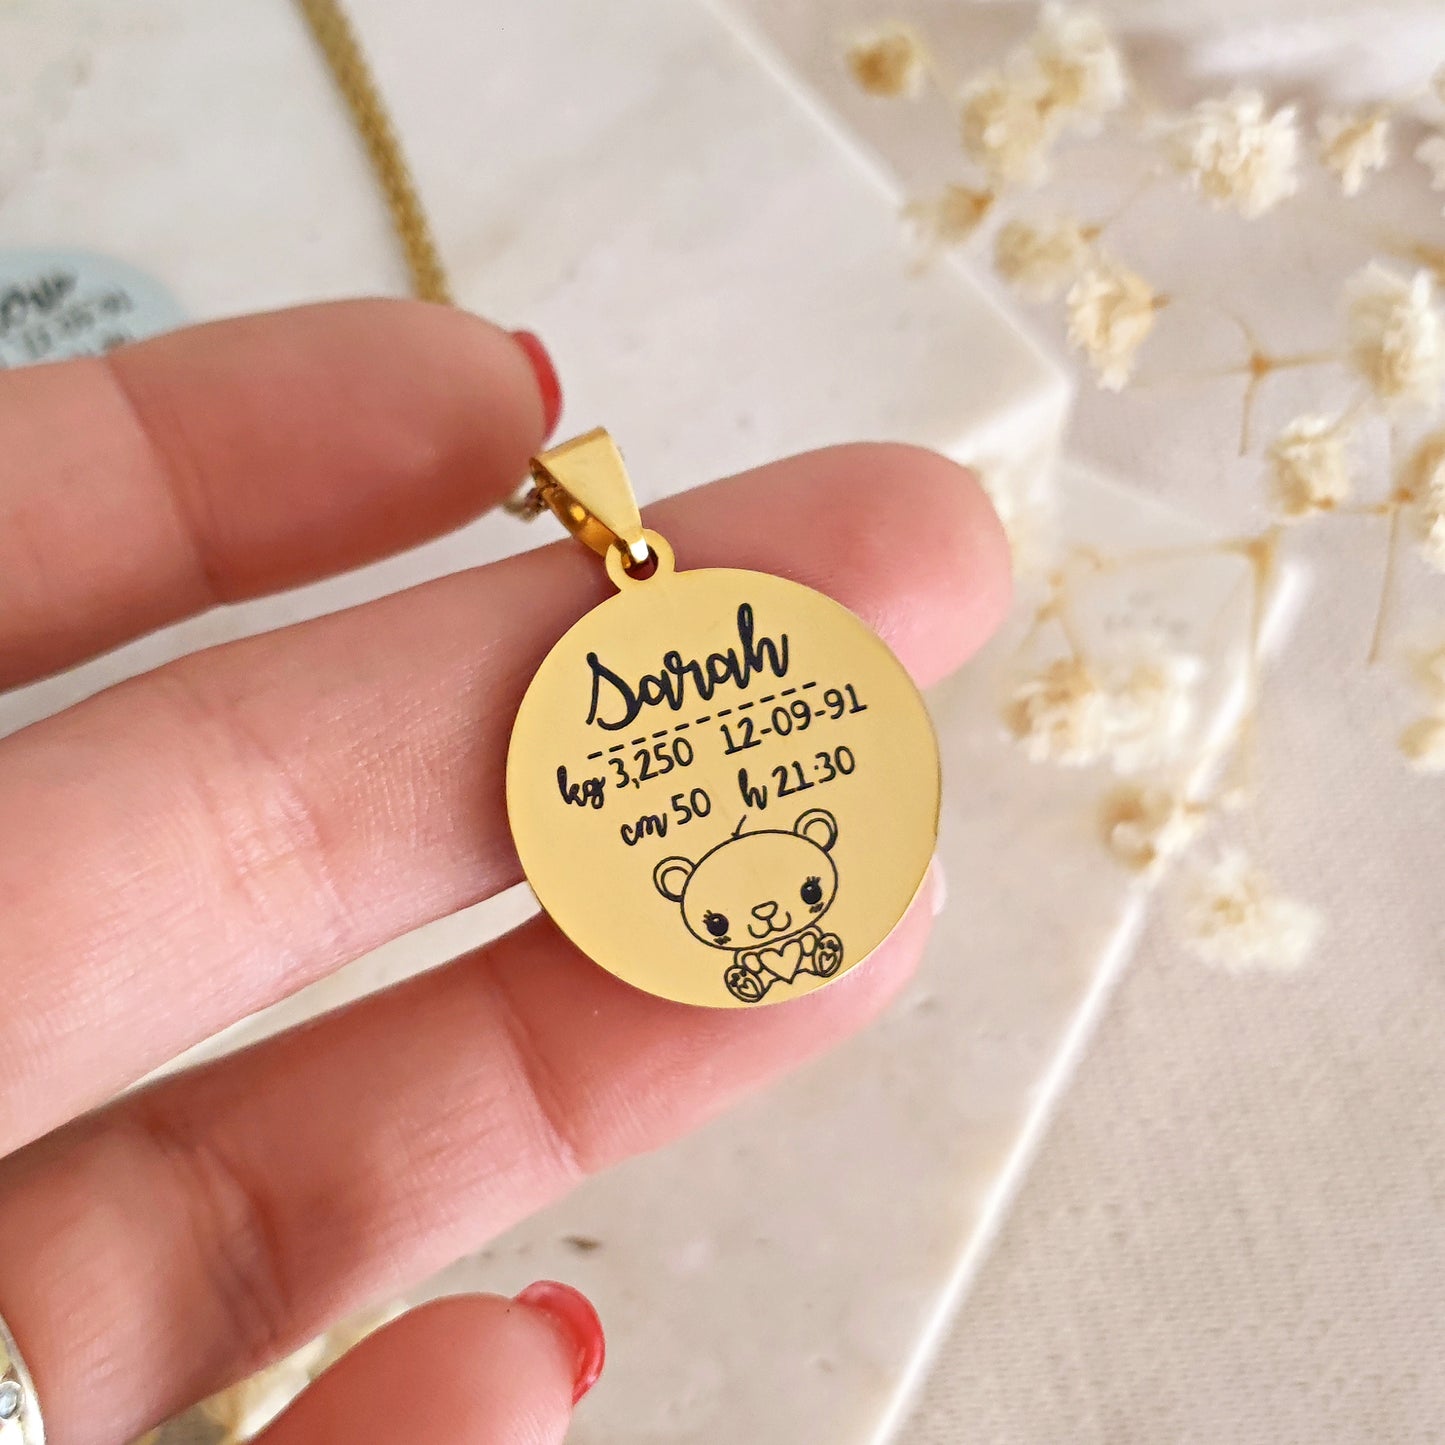 New Baby Necklace, New Mom New Dad Gift, Personalized Jewelry, Baby Arrival, Mommy & Daddy Keychain, Welcome Baby Gift Name Birth Date